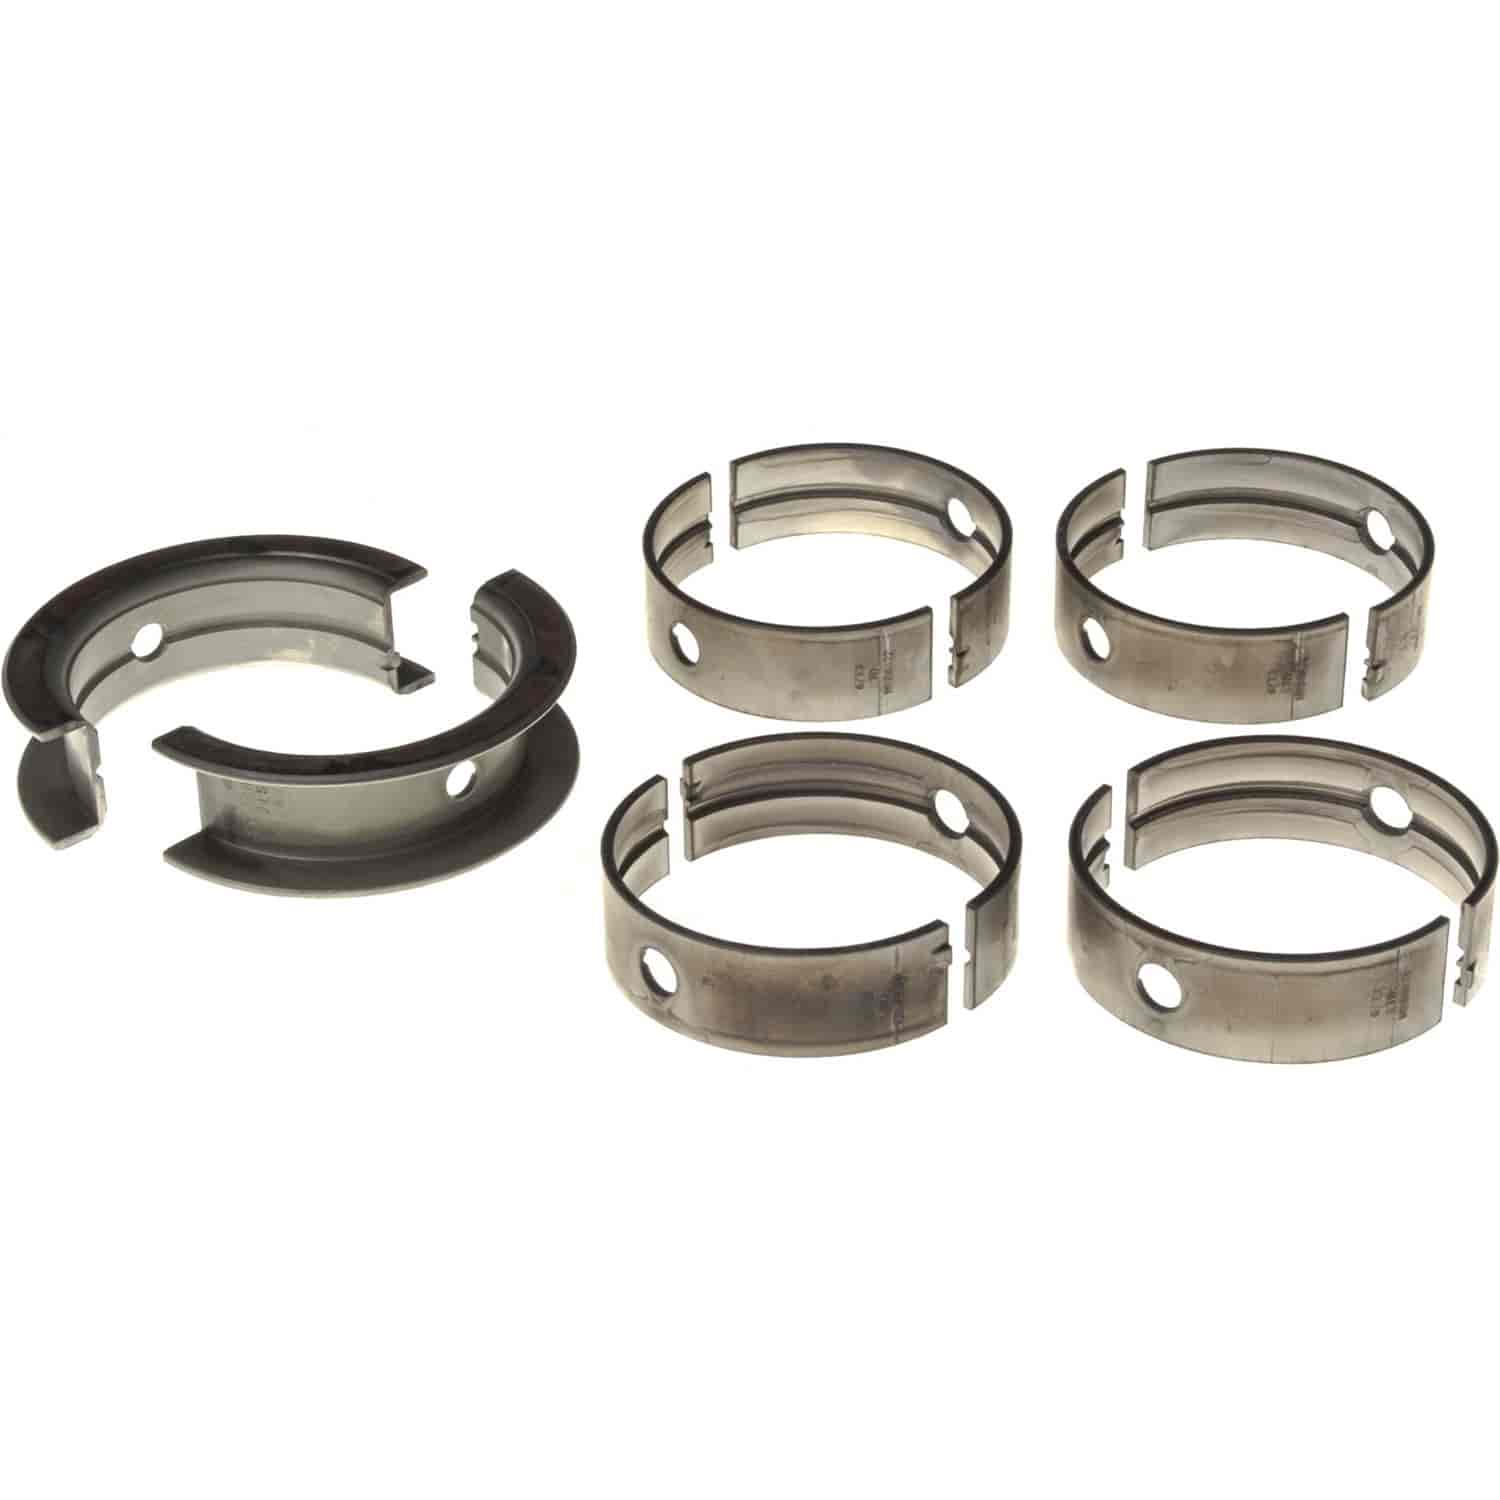 Main Bearing Set Ford 1964-1977 FE V8 352/360/390/410/427/428 (5.8/5.9/6.4/6.7/7.0L) with -.040" Undersize